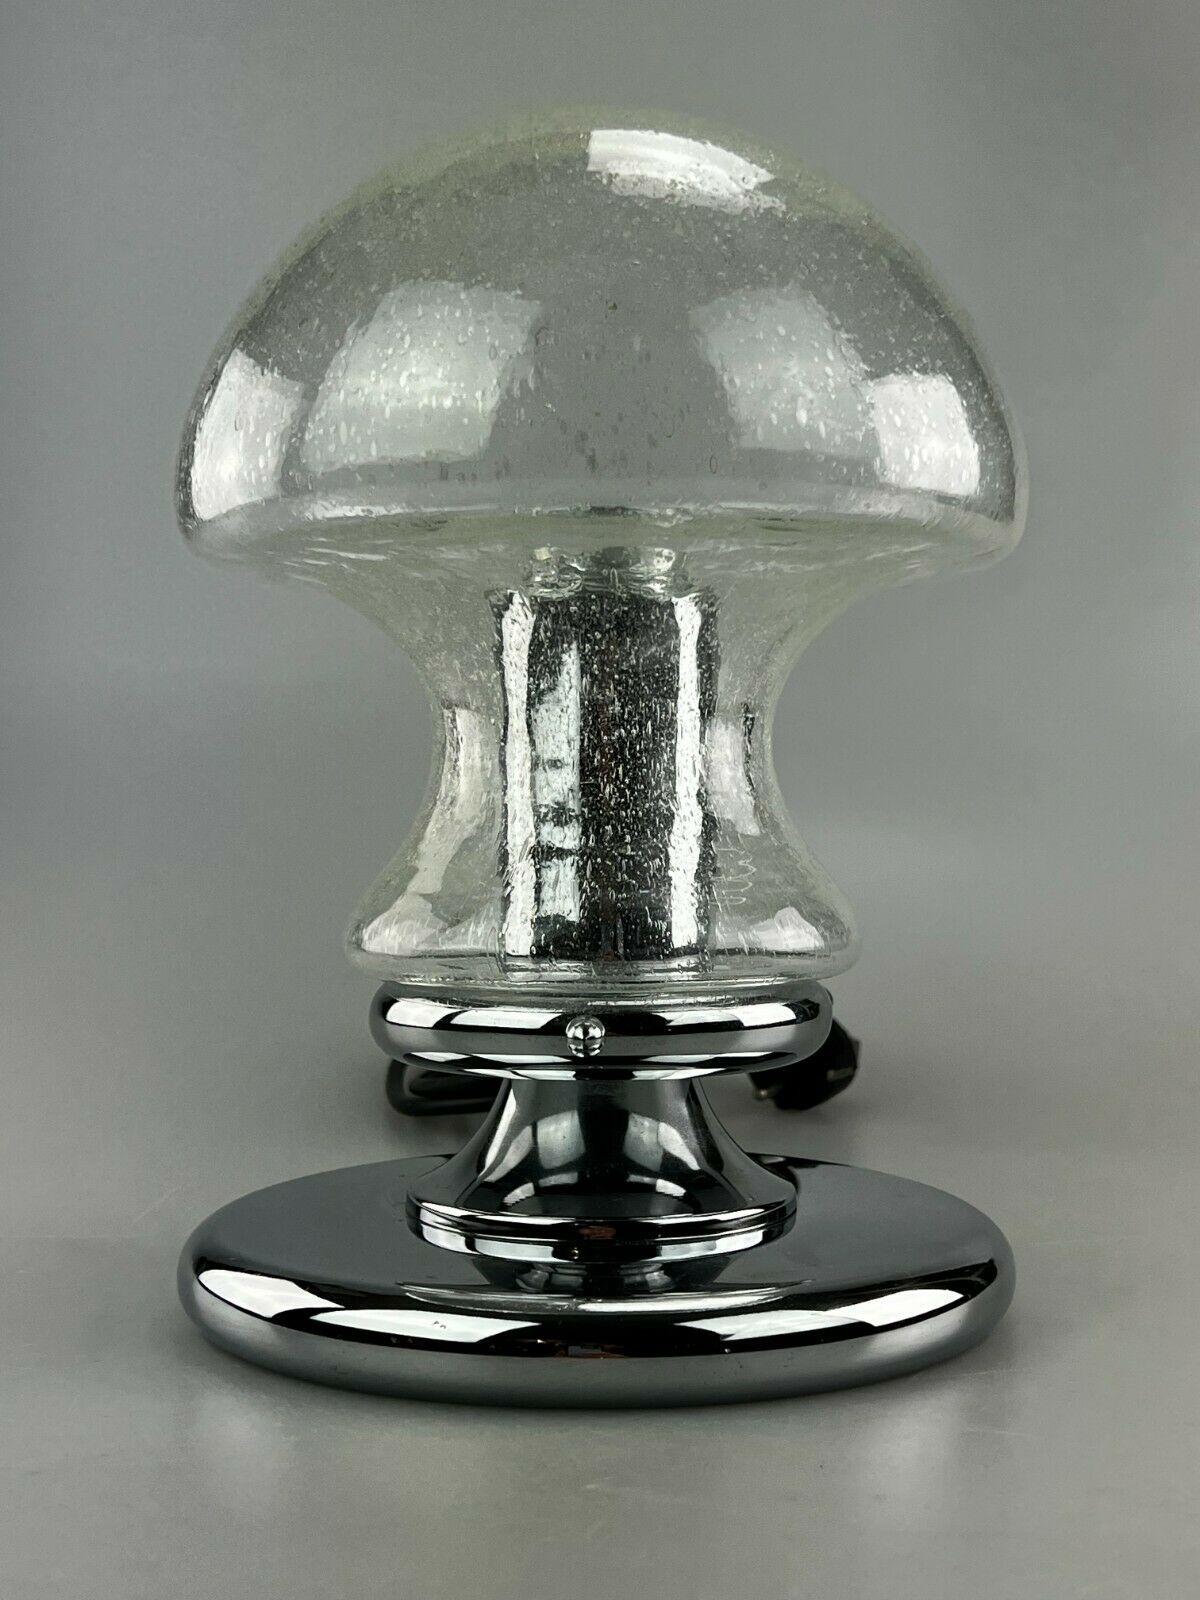 60s 70s Mushroom table lamp table lamp from Baum Leuchten Germany

Object: table lamp

Manufacturer: tree lights

Condition: good

Age: around 1960-1970

Dimensions:

Diameter = 20cm
Height = 28cm

Other notes:

The pictures serve